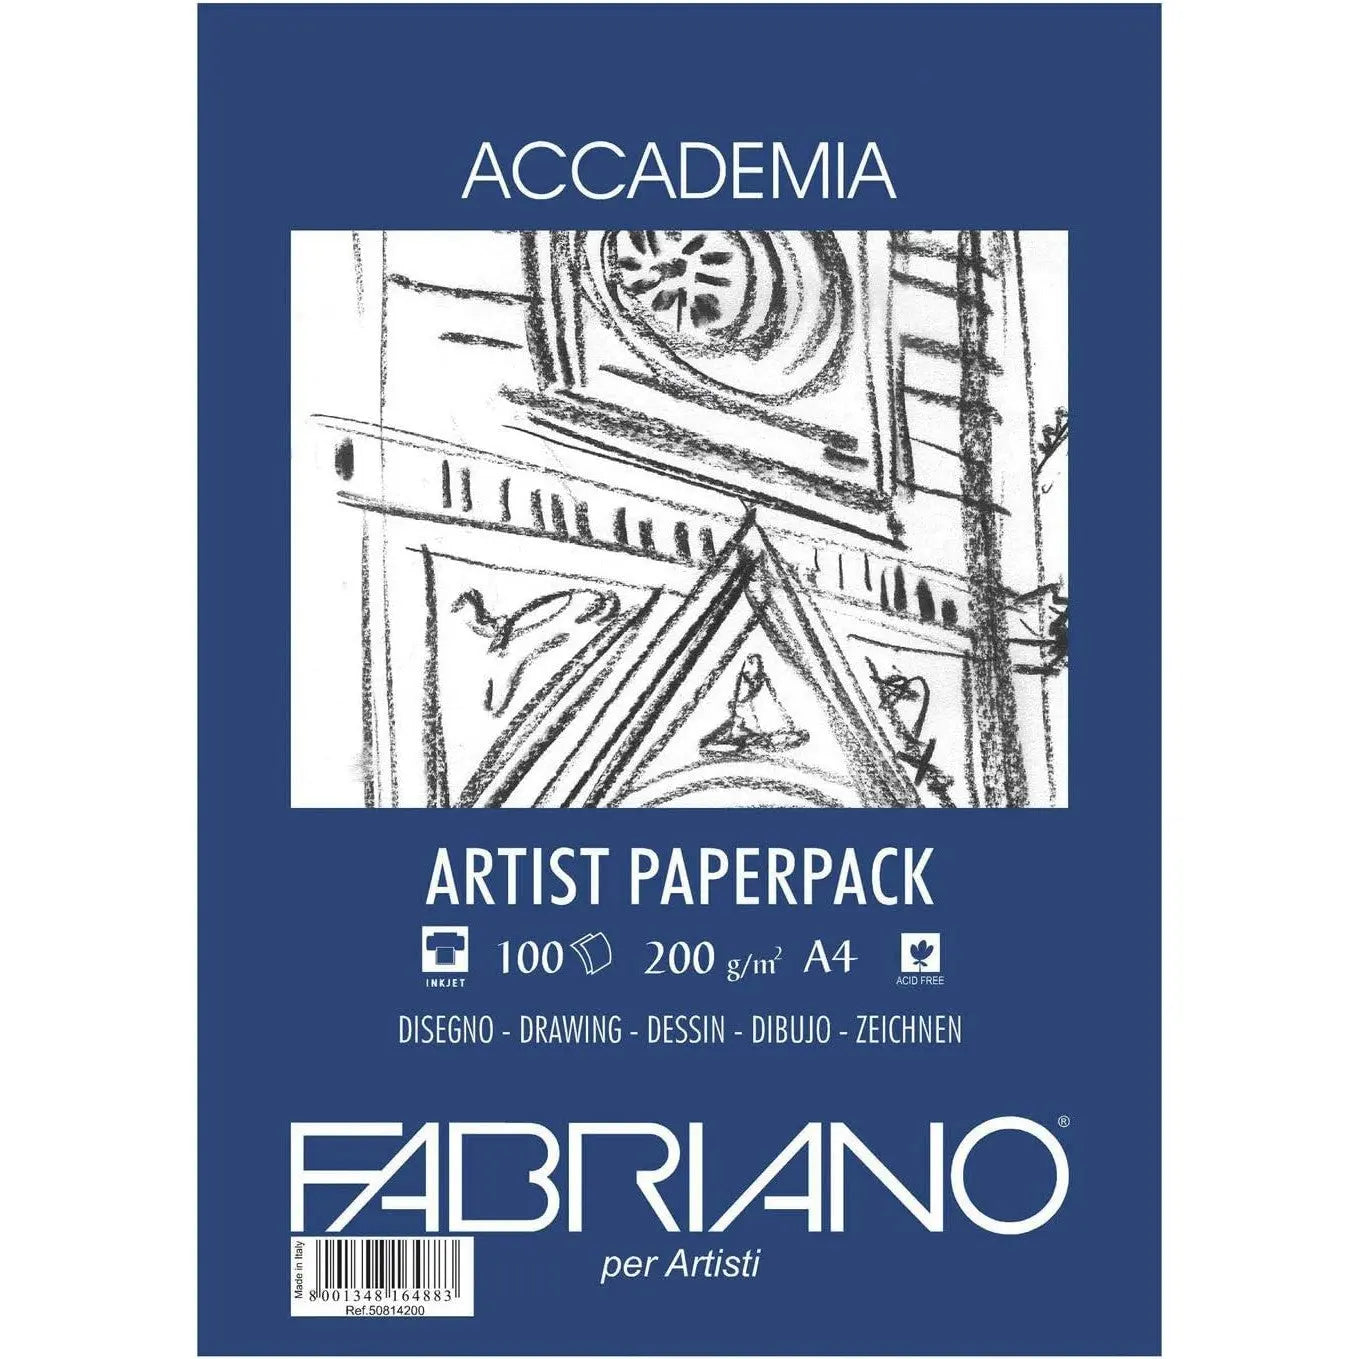 Fabriano Accademia Drawing Artists Paperpack 200 Gsm A4 (Pack of 100) Fabriano